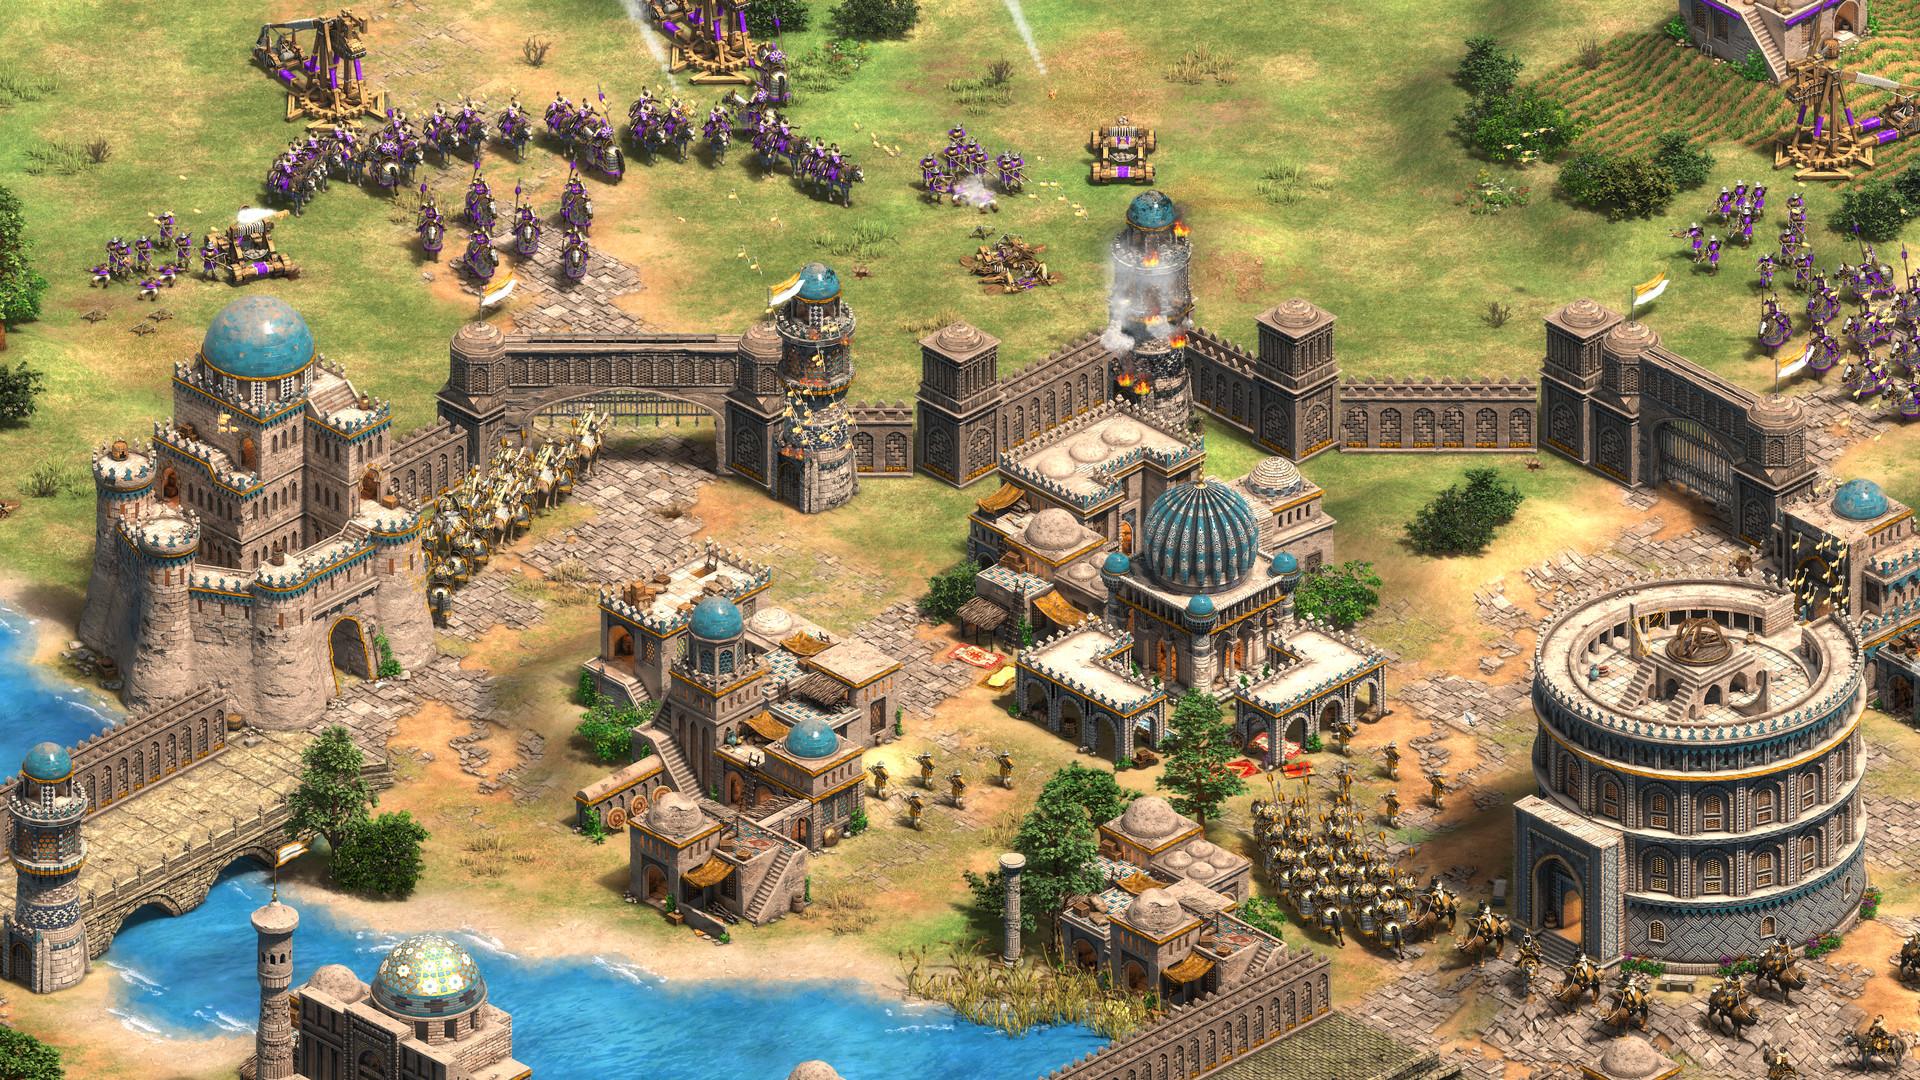 Retro Video Games That Stand Up - Age of Empires 2